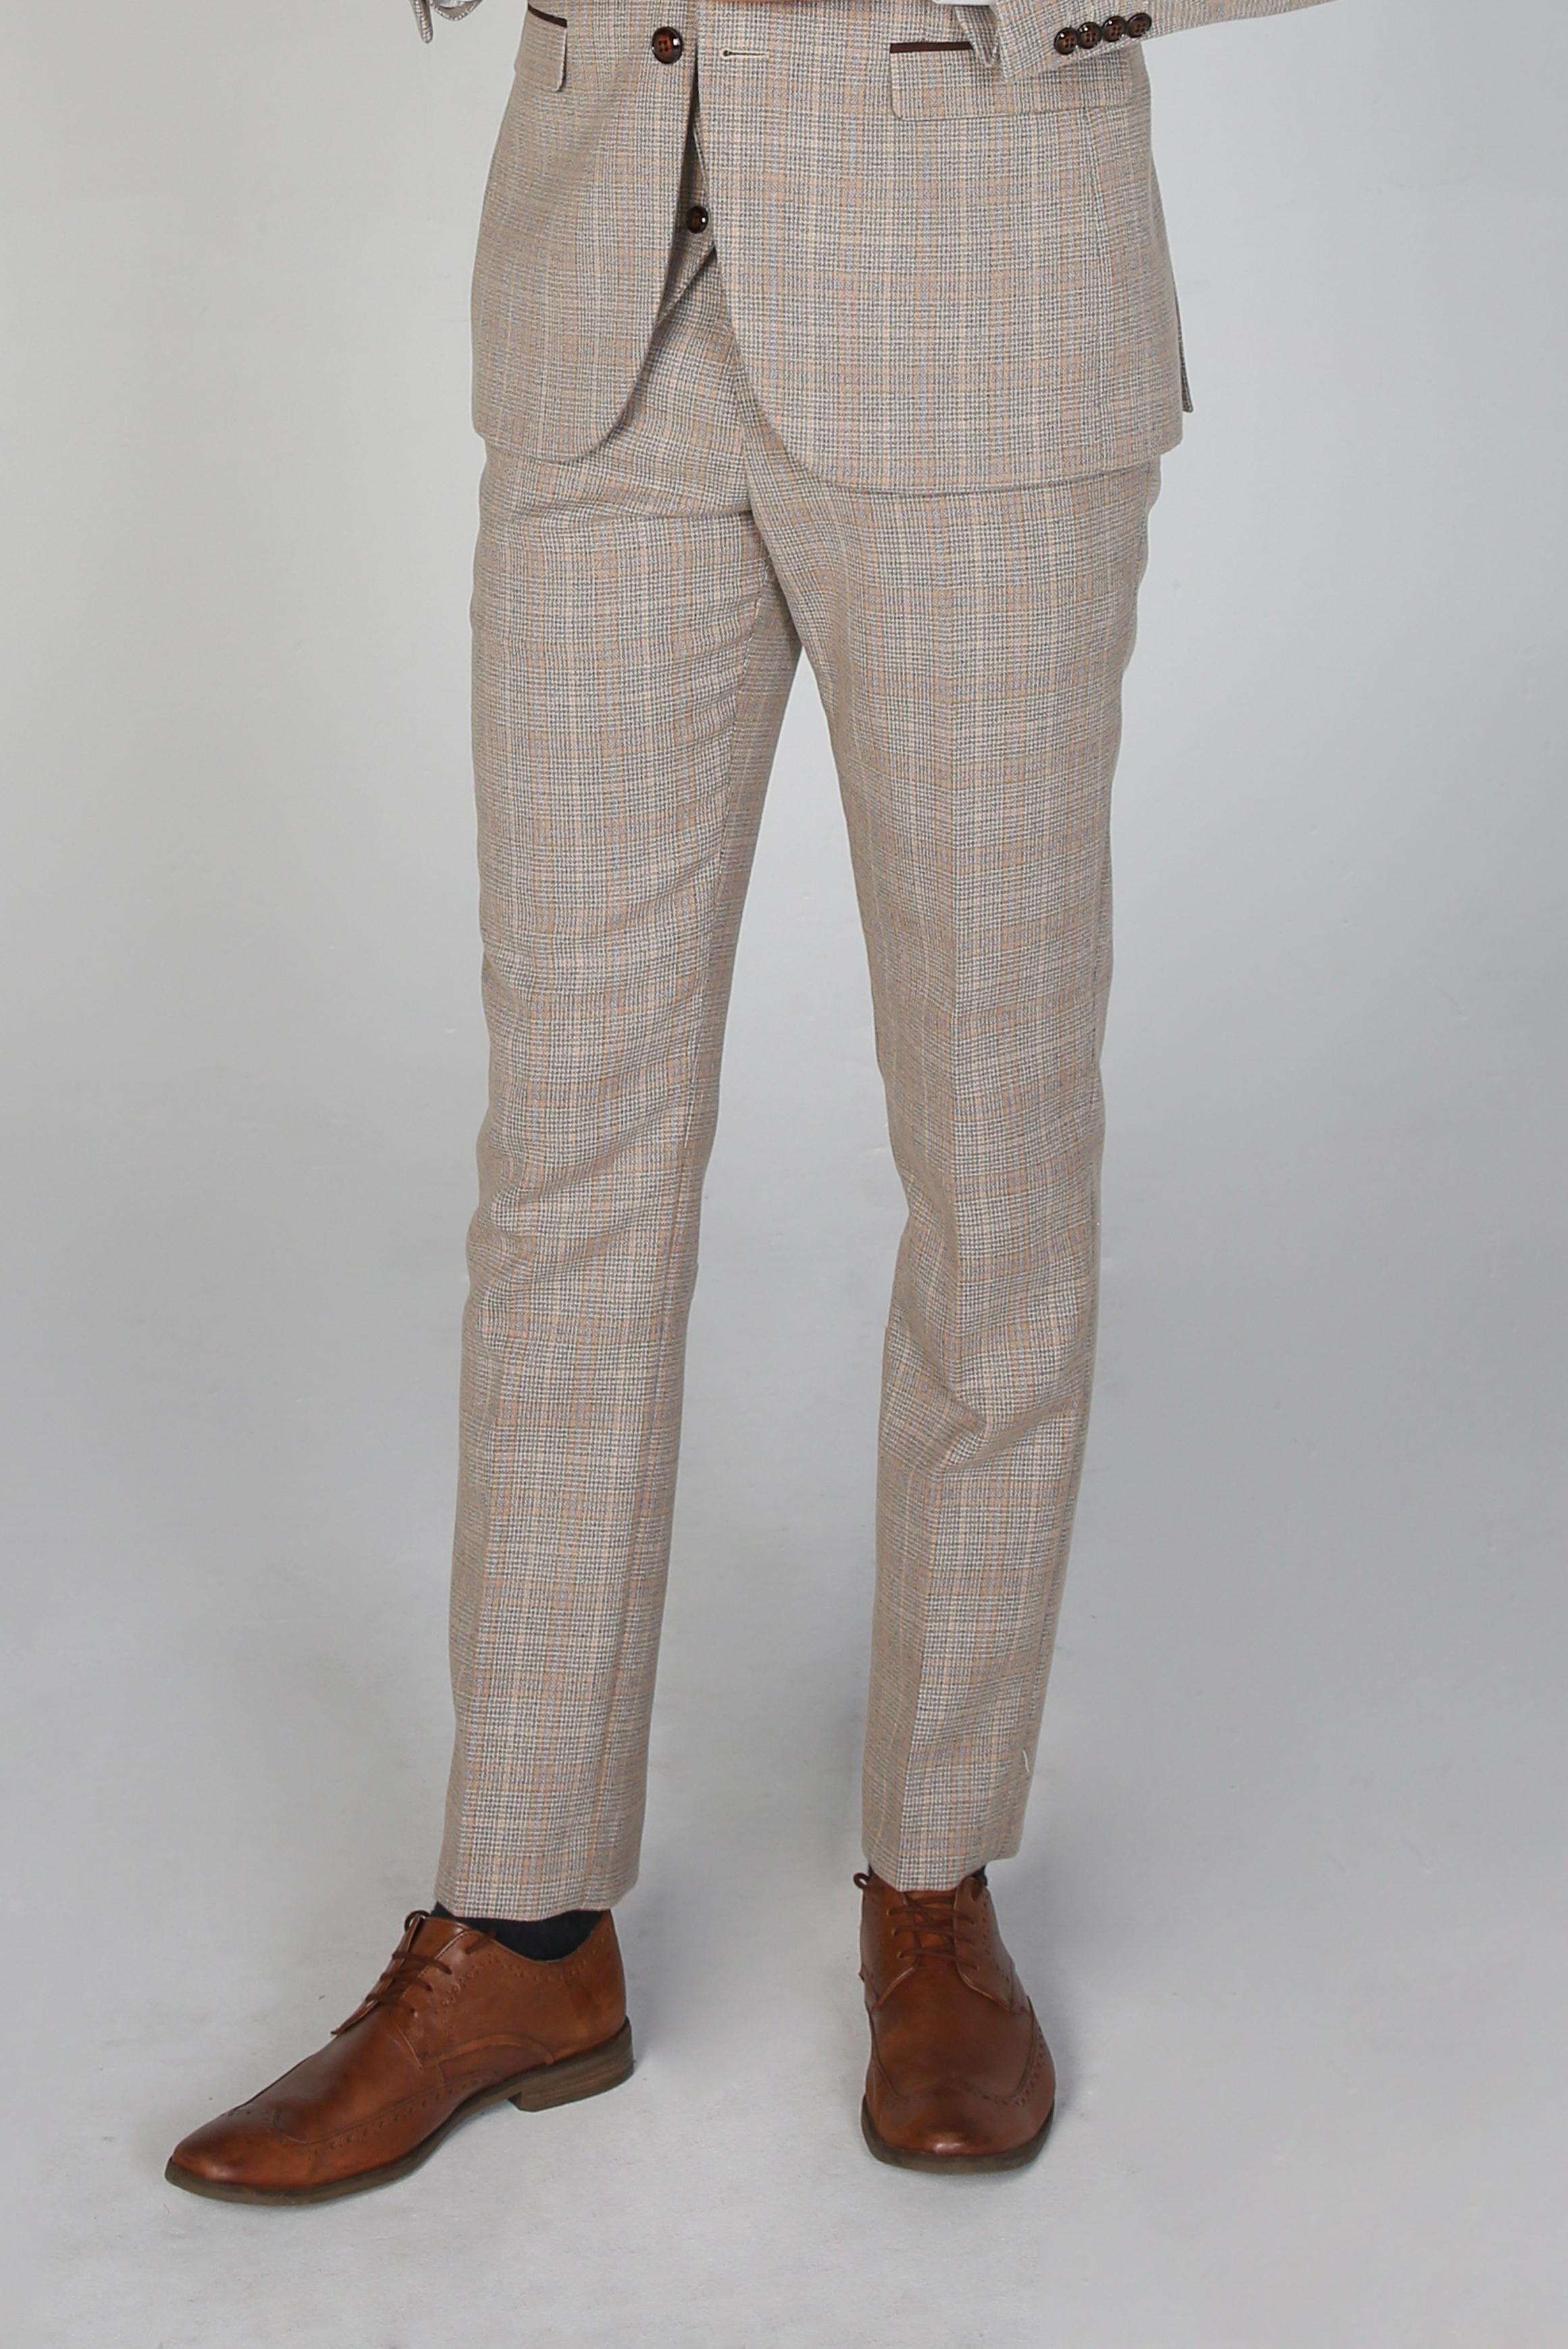 Men's Houndstooth Tweed Check Trousers - HOLLAND